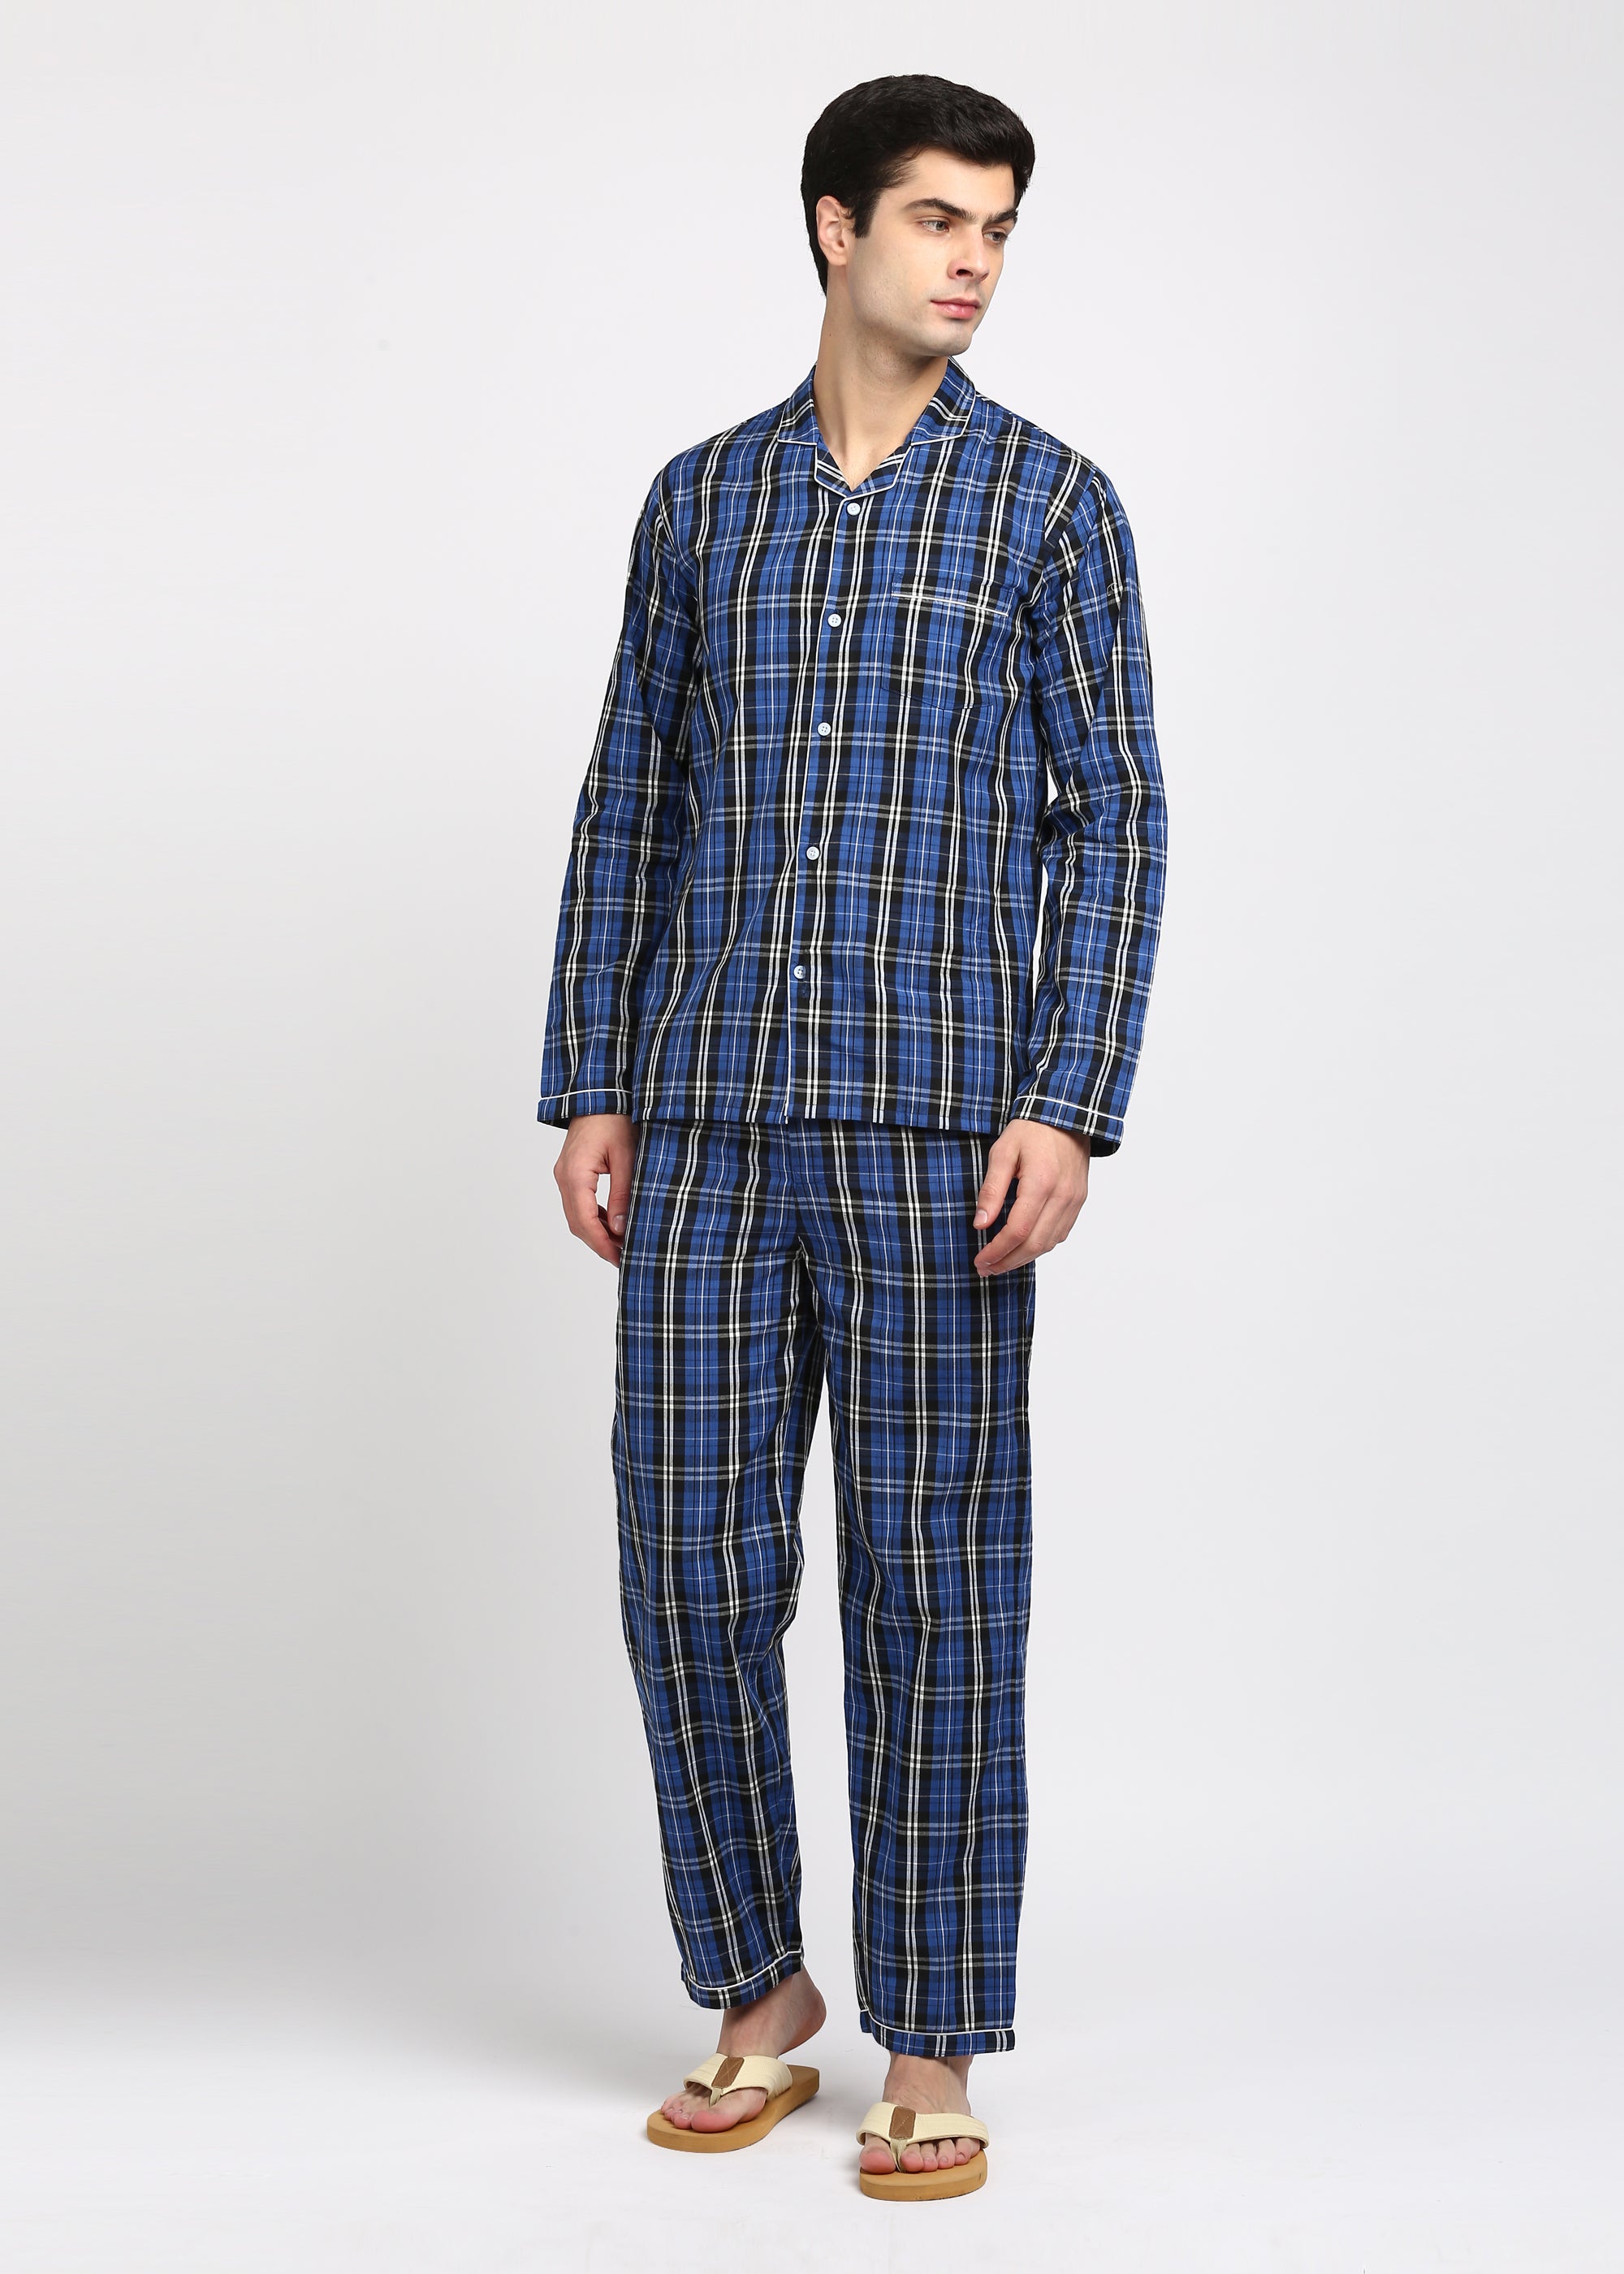 Blue and Black Checkered Long Sleeve Men's Night Suit - Shopbloom